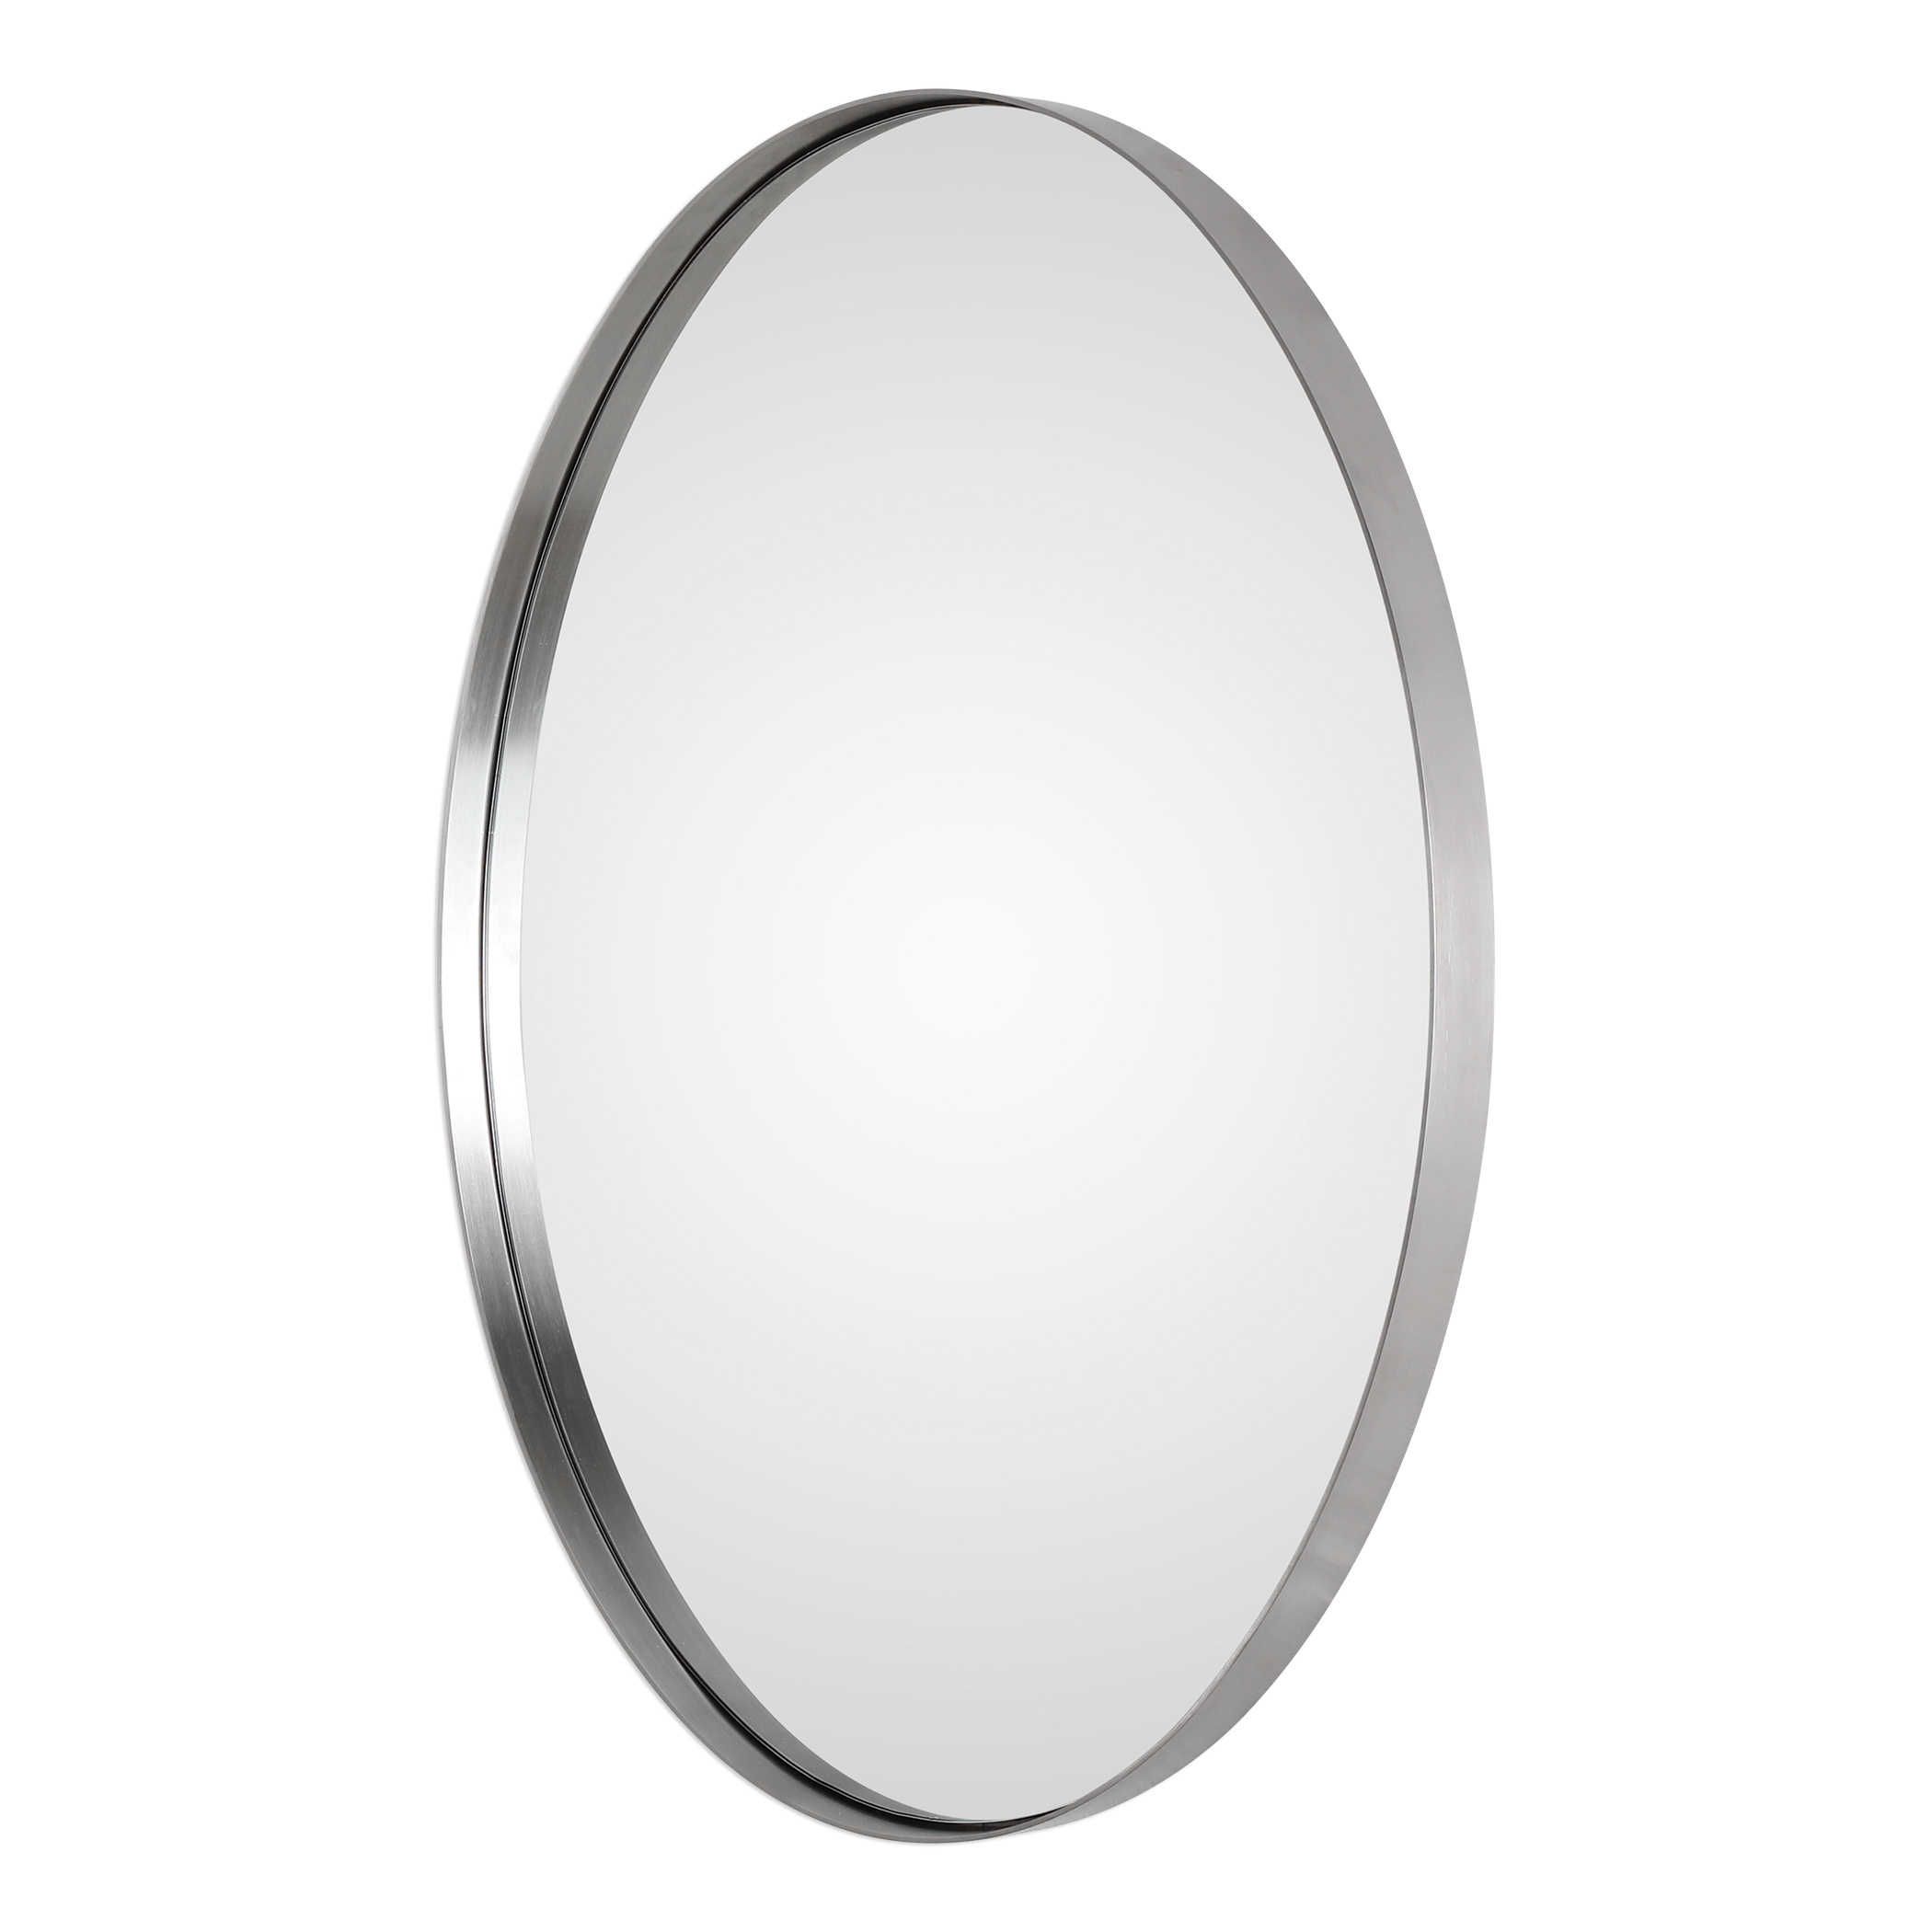 Pursley Brushed Nickel Oval Mirroruttermost 50Cm X 76Cm Regarding Brushed Nickel Round Wall Mirrors (View 2 of 15)